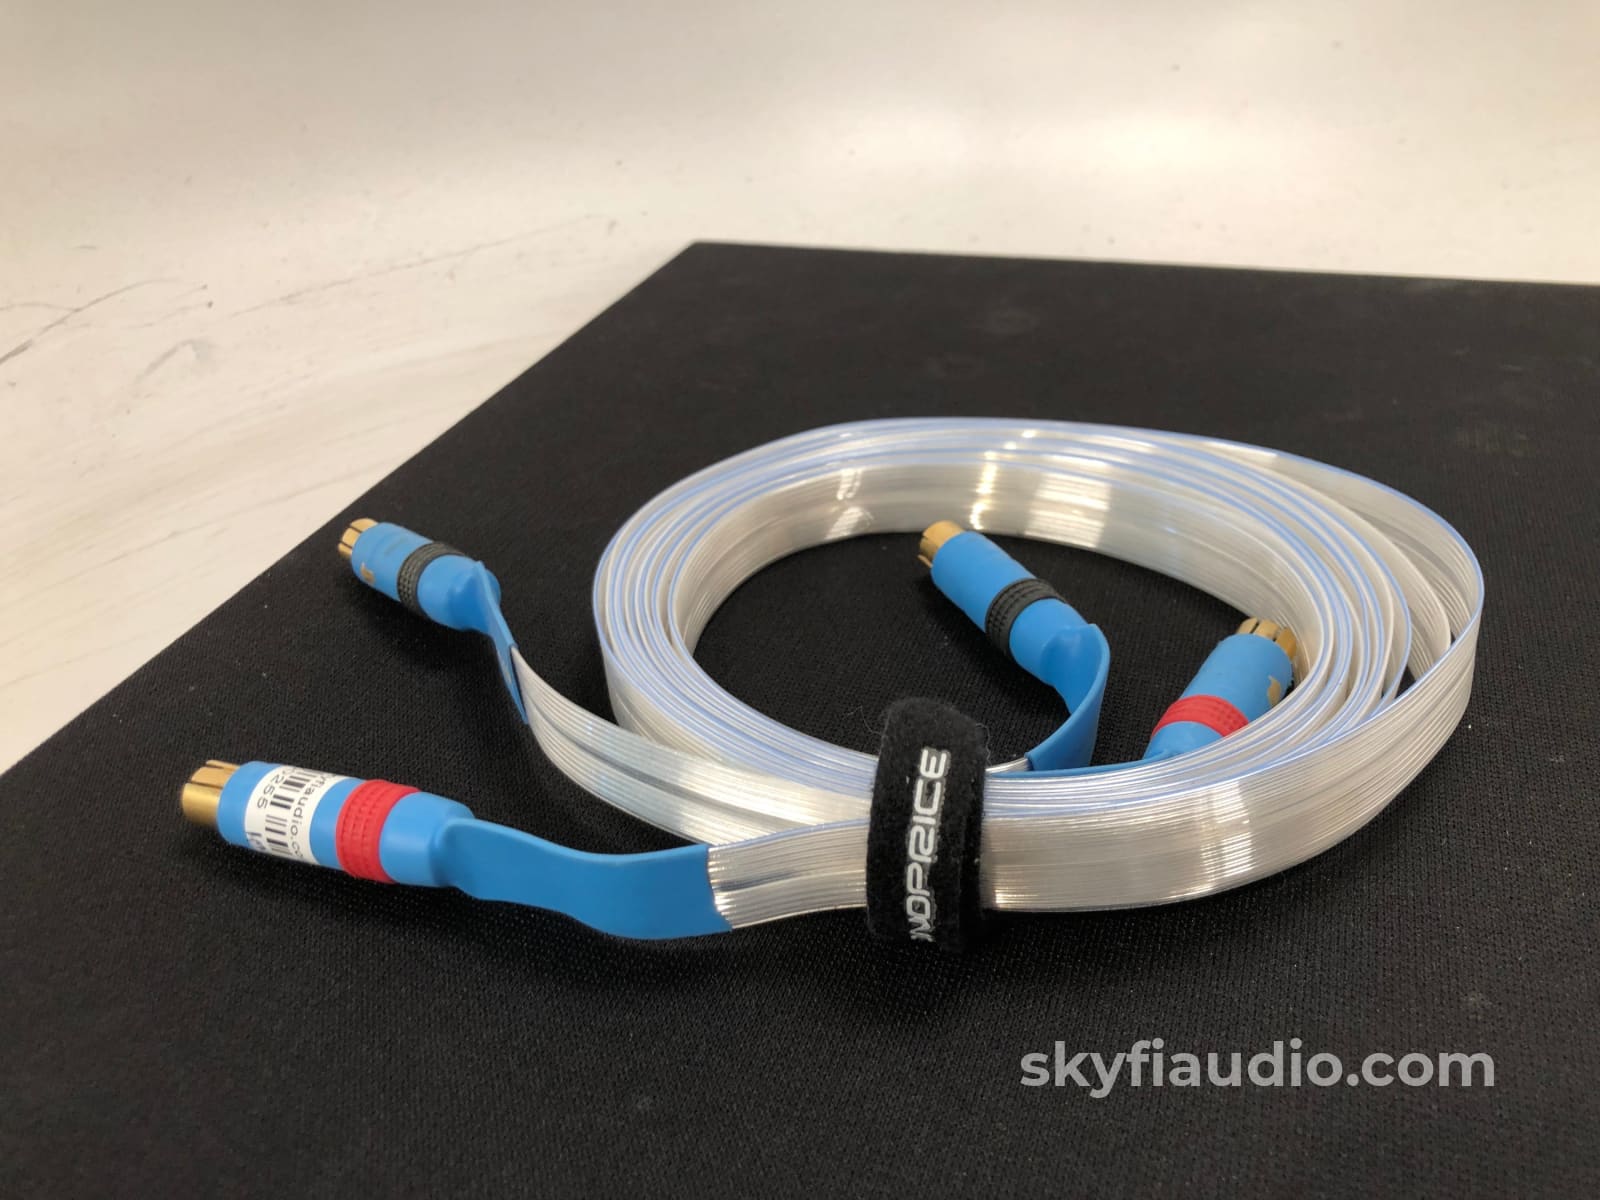 Nordost Blue Heaven Flatline Stereo Rca Audio Cable - 3M Cables